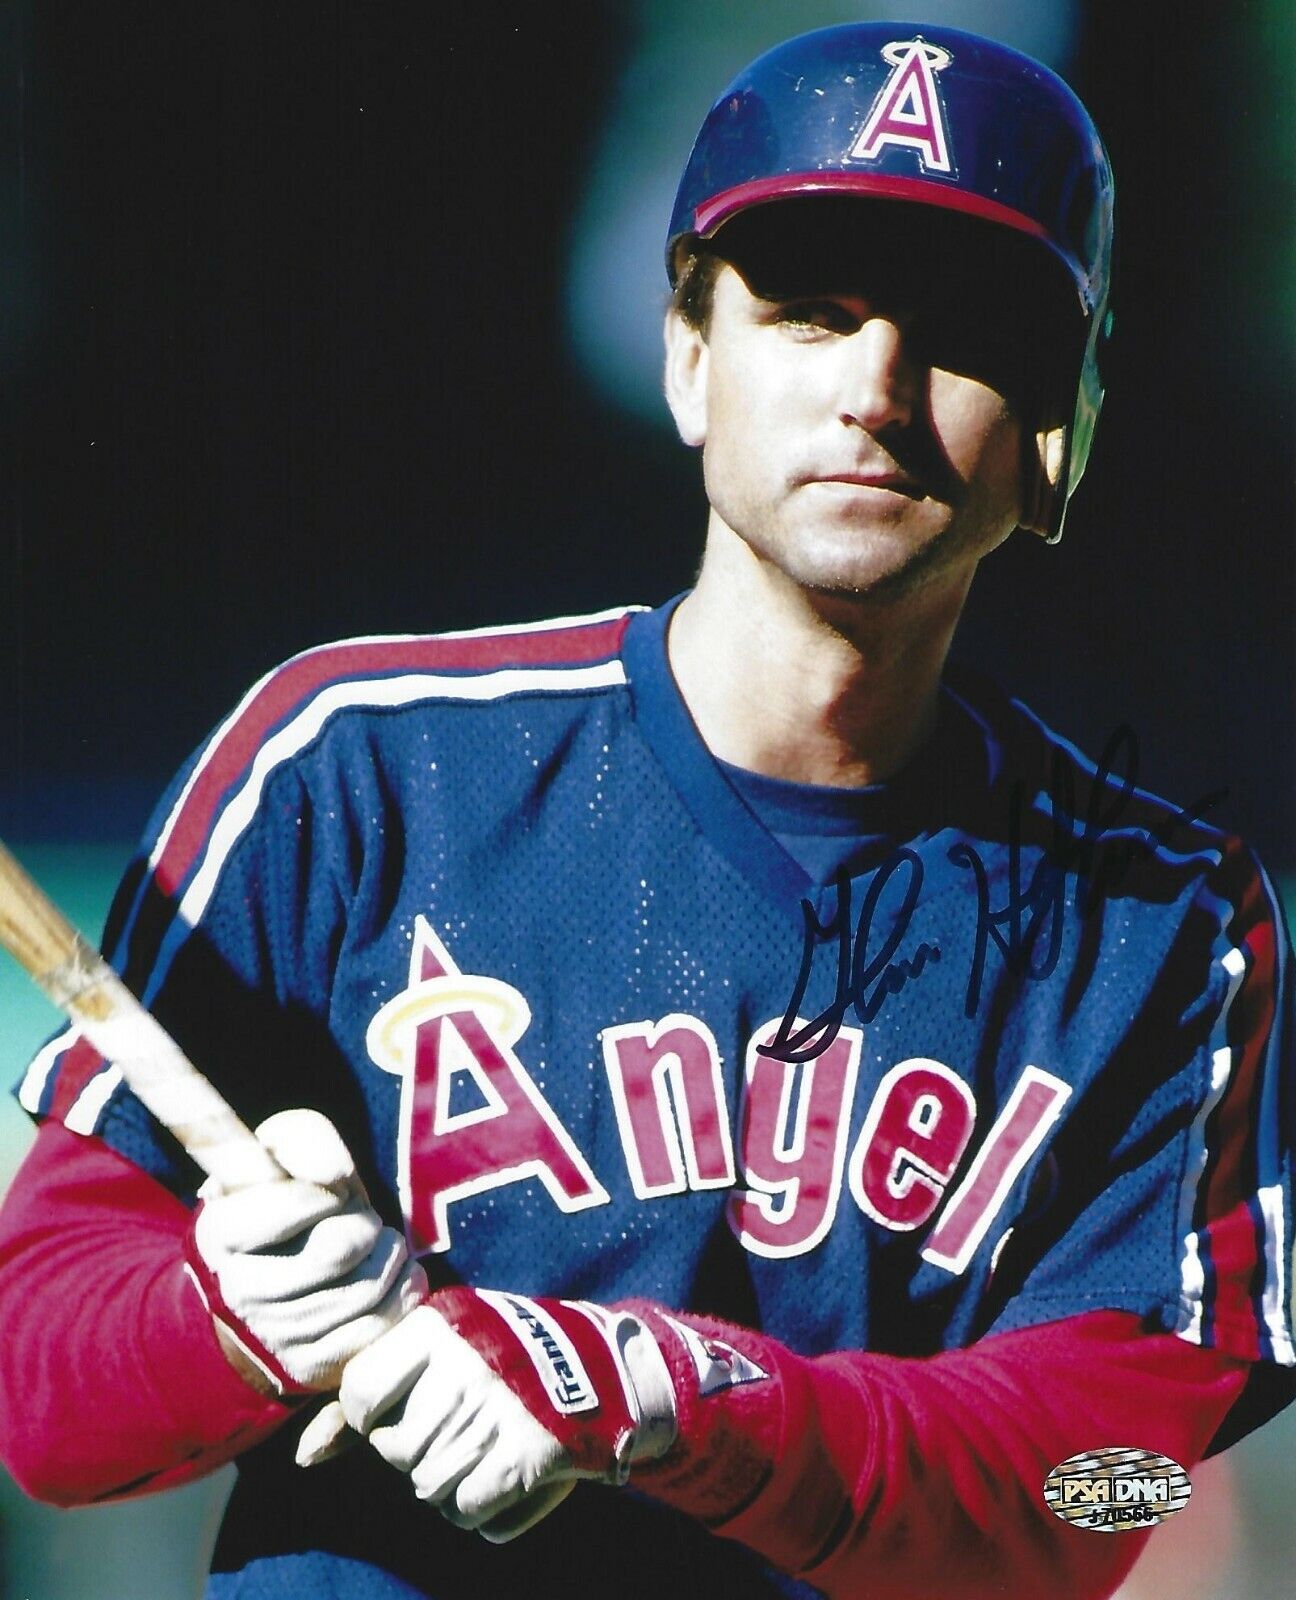 Glenn Hoffman Signed 8x10 Photo Poster painting PSA/DNA COA 89 Angels Baseball Picture Autograph